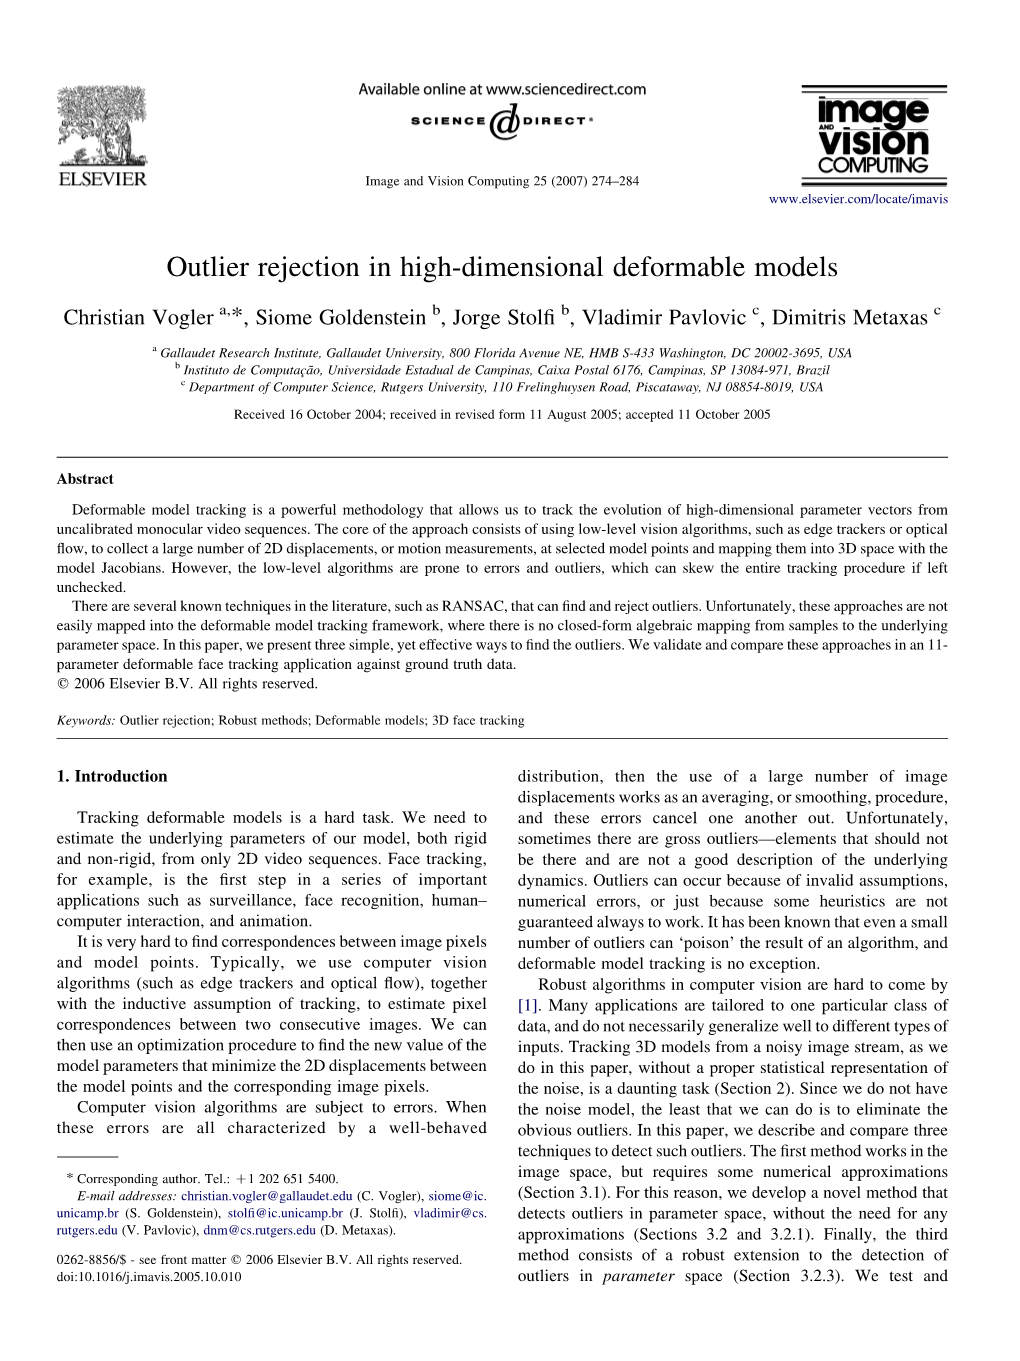 Outlier Rejection in High-Dimensional Deformable Models